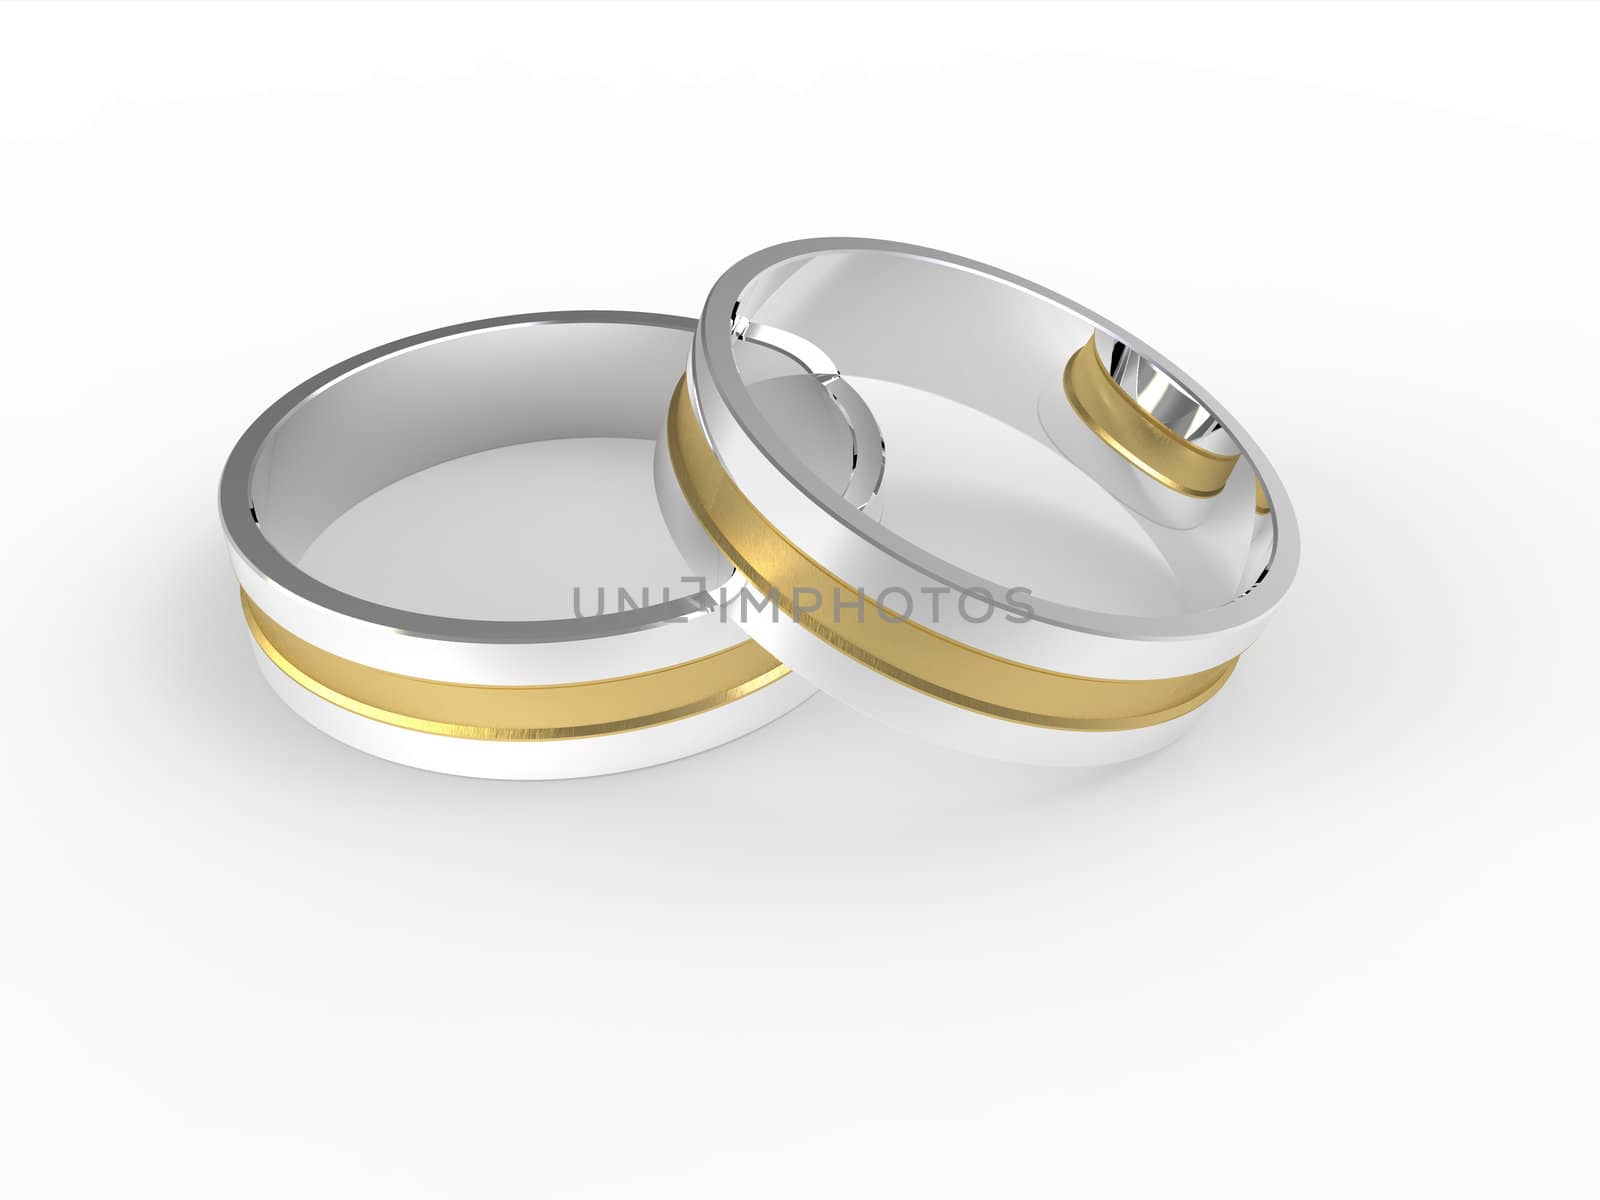 Golden and silver wedding rings isolated on white background by vermicule